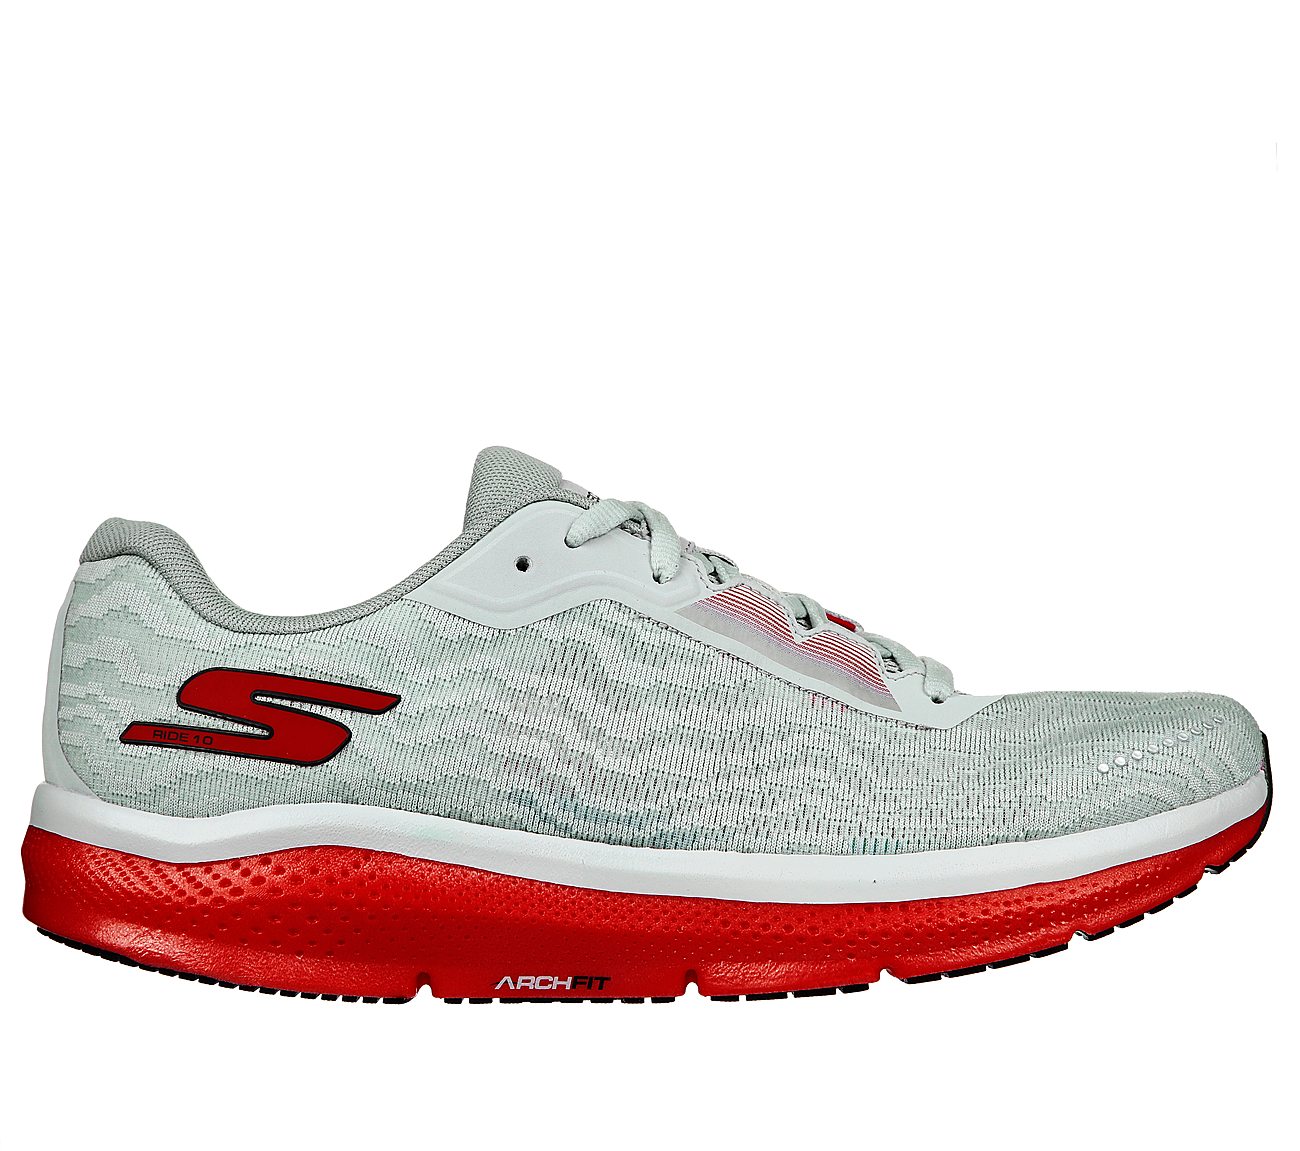 Skechers Grey/Red Go Run Ride 10 Running Shoes For Men - Style ID: 246045 |